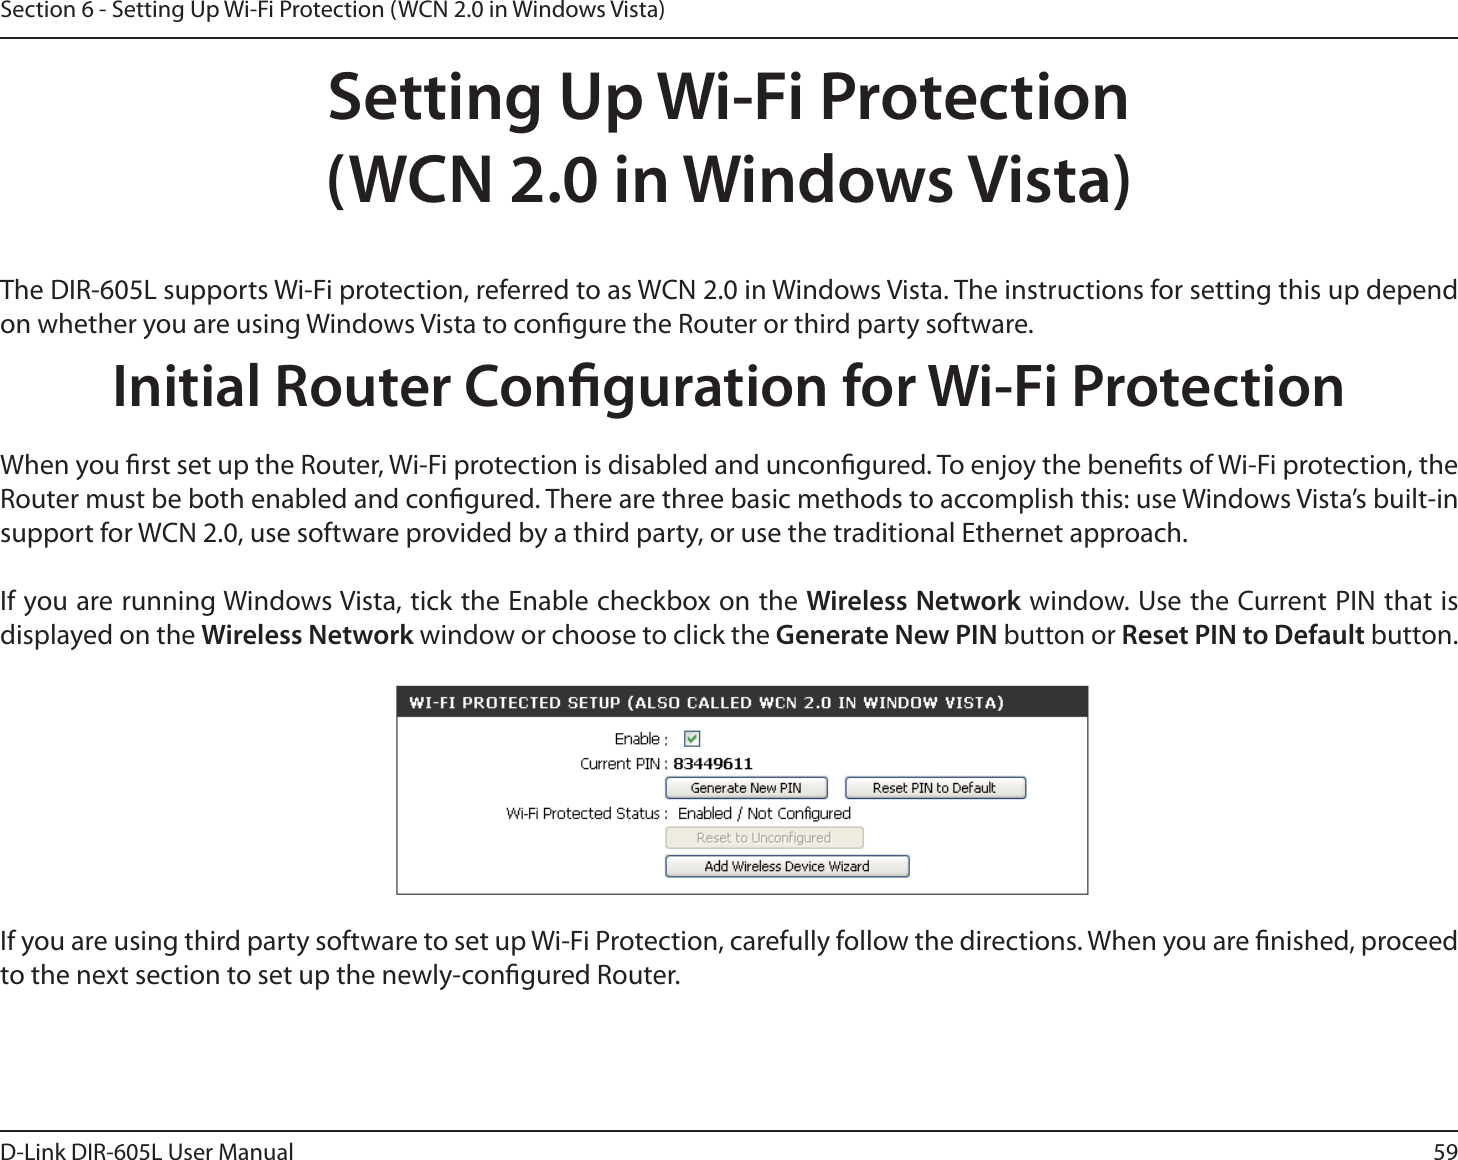 59D-Link DIR-605L User ManualSection 6 - Setting Up Wi-Fi Protection (WCN 2.0 in Windows Vista)Setting Up Wi-Fi Protection(WCN 2.0 in Windows Vista)The DIR-605L supports Wi-Fi protection, referred to as WCN 2.0 in Windows Vista. The instructions for setting this up depend on whether you are using Windows Vista to congure the Router or third party software.        Initial Router Conguration for Wi-Fi ProtectionWhen you rst set up the Router, Wi-Fi protection is disabled and uncongured. To enjoy the benets of Wi-Fi protection, the Router must be both enabled and congured. There are three basic methods to accomplish this: use Windows Vista’s built-in support for WCN 2.0, use software provided by a third party, or use the traditional Ethernet approach. If you are running Windows Vista, tick the Enable checkbox on the Wireless Network window. Use the Current PIN that is displayed on the Wireless Network window or choose to click the Generate New PIN button or Reset PIN to Default button. If you are using third party software to set up Wi-Fi Protection, carefully follow the directions. When you are nished, proceed to the next section to set up the newly-congured Router. 